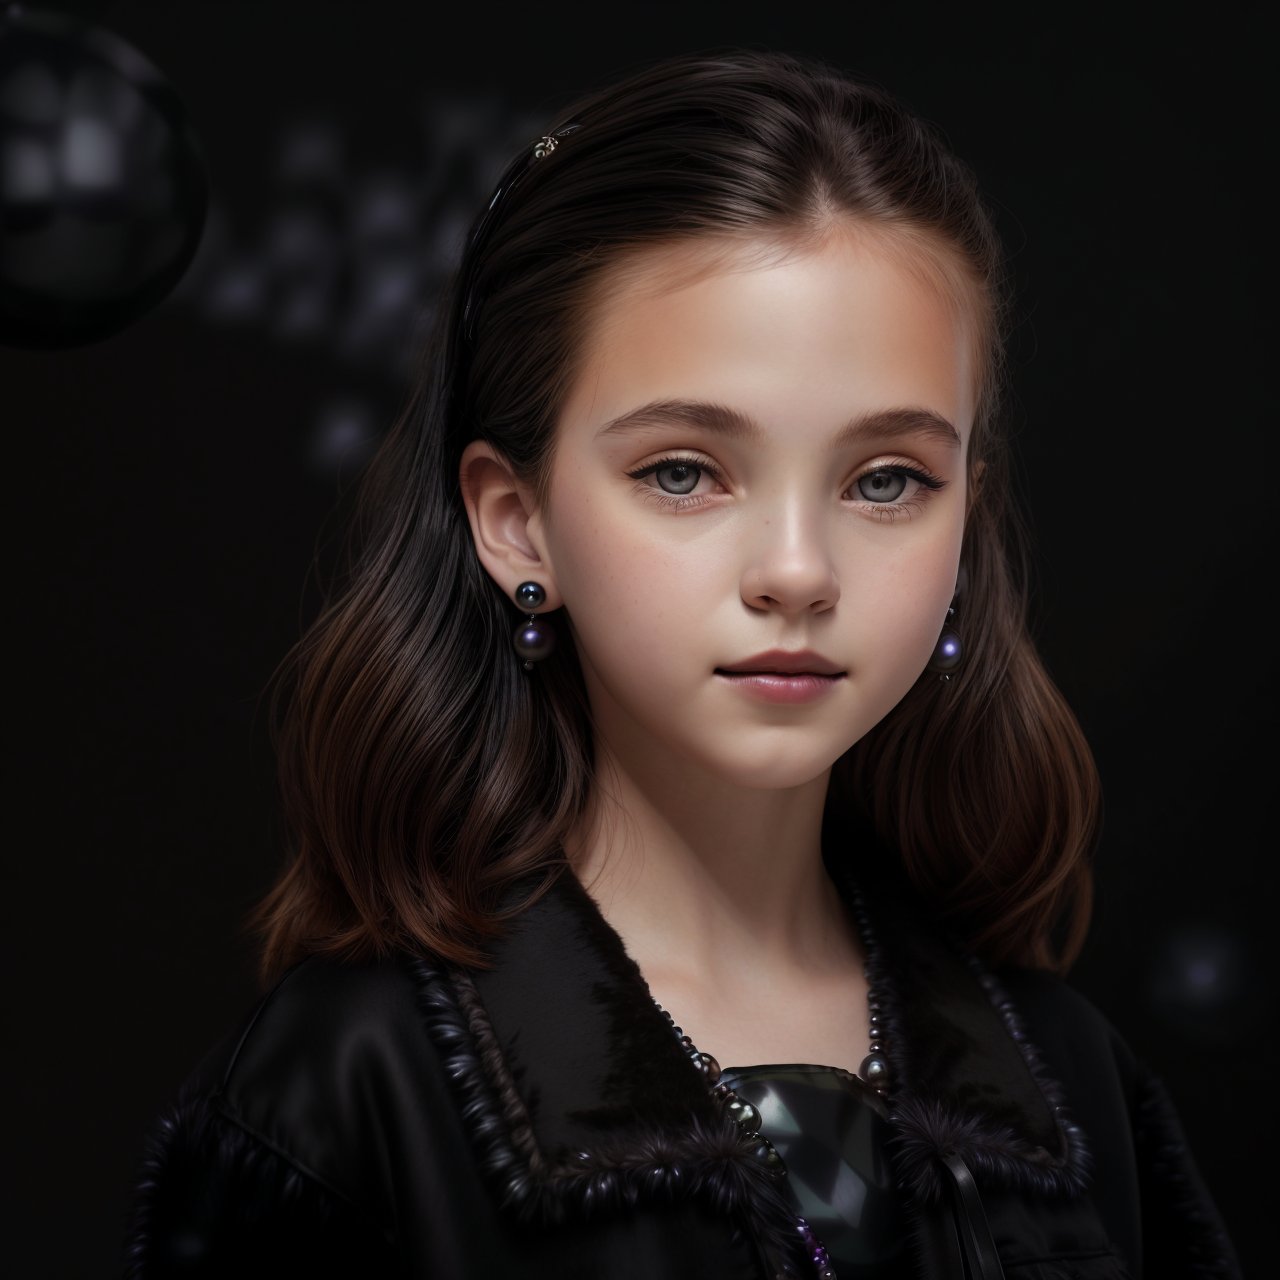 (masterpiece:1.3), wallpaper, portrait of charming (AIDA_LoRA_arusso:1.02) <lora:AIDA_LoRA_arusso:0.77> in a sherpa jacket posing in front of (black pearl background:1.5), little girl, pretty face, open mouth, cinematic, insane level of details, intricate pattern, studio photo, studio photo, kkw-ph1, hdr, f1.6, (colorful:1.1)